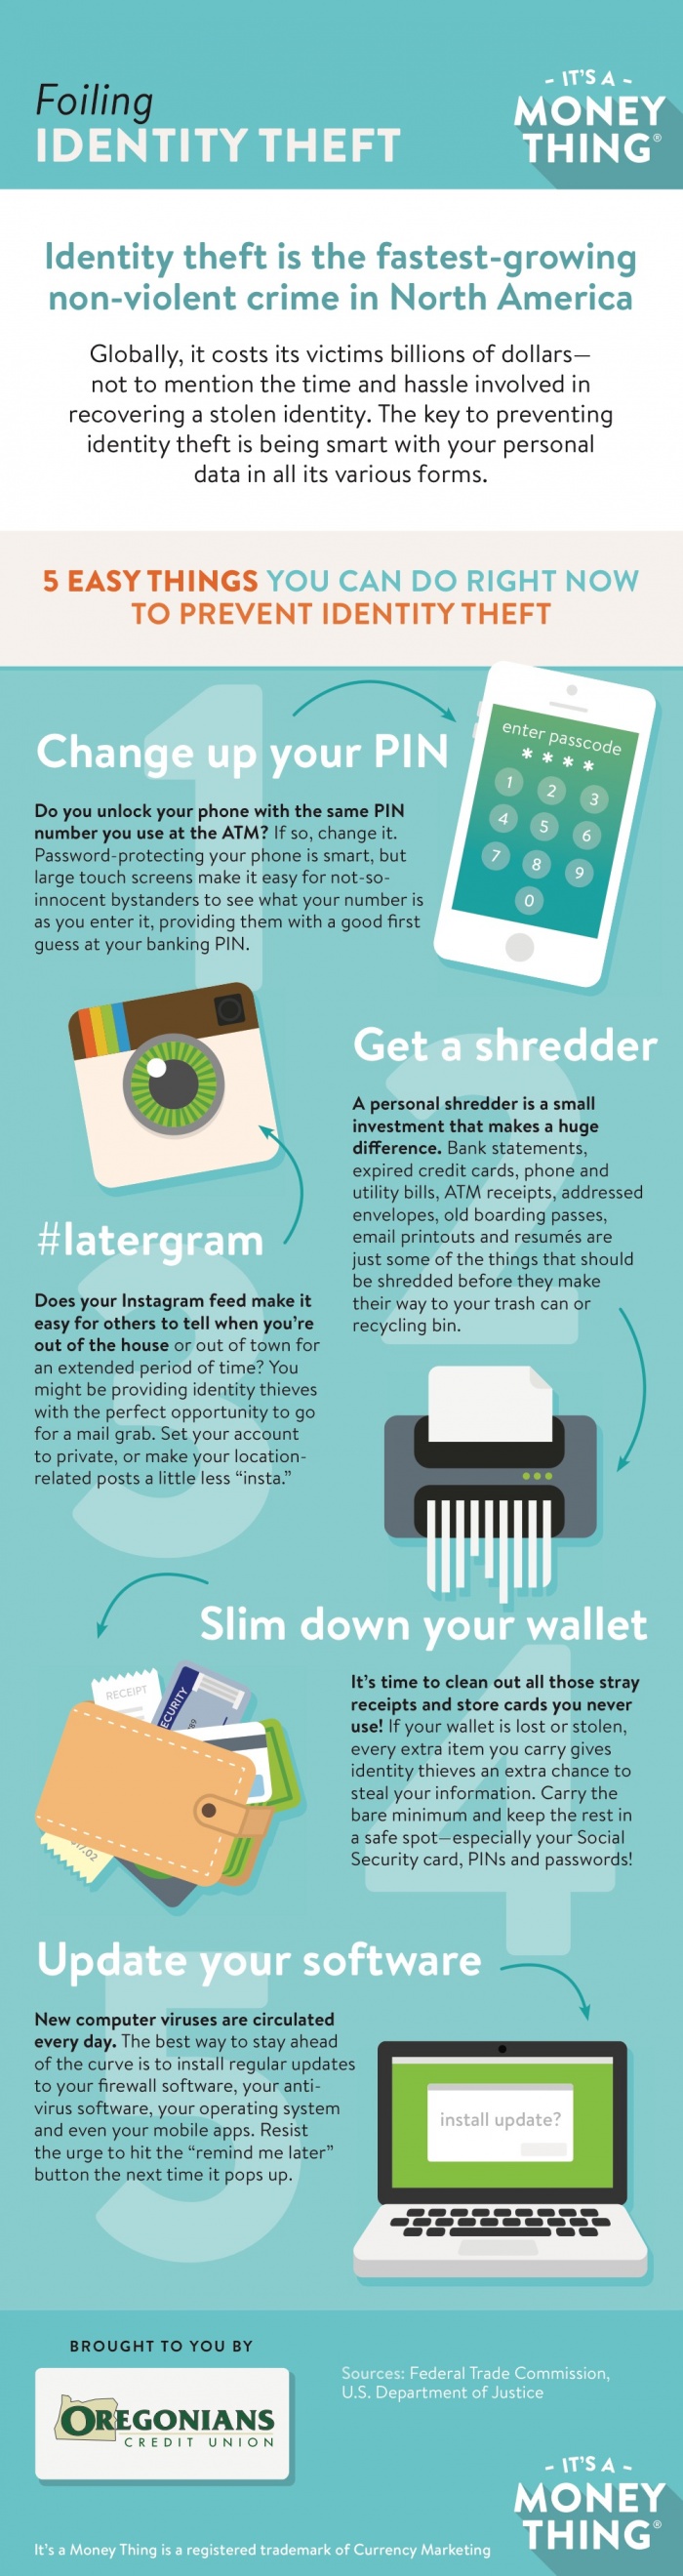 Foiling Identity Theft Infographic